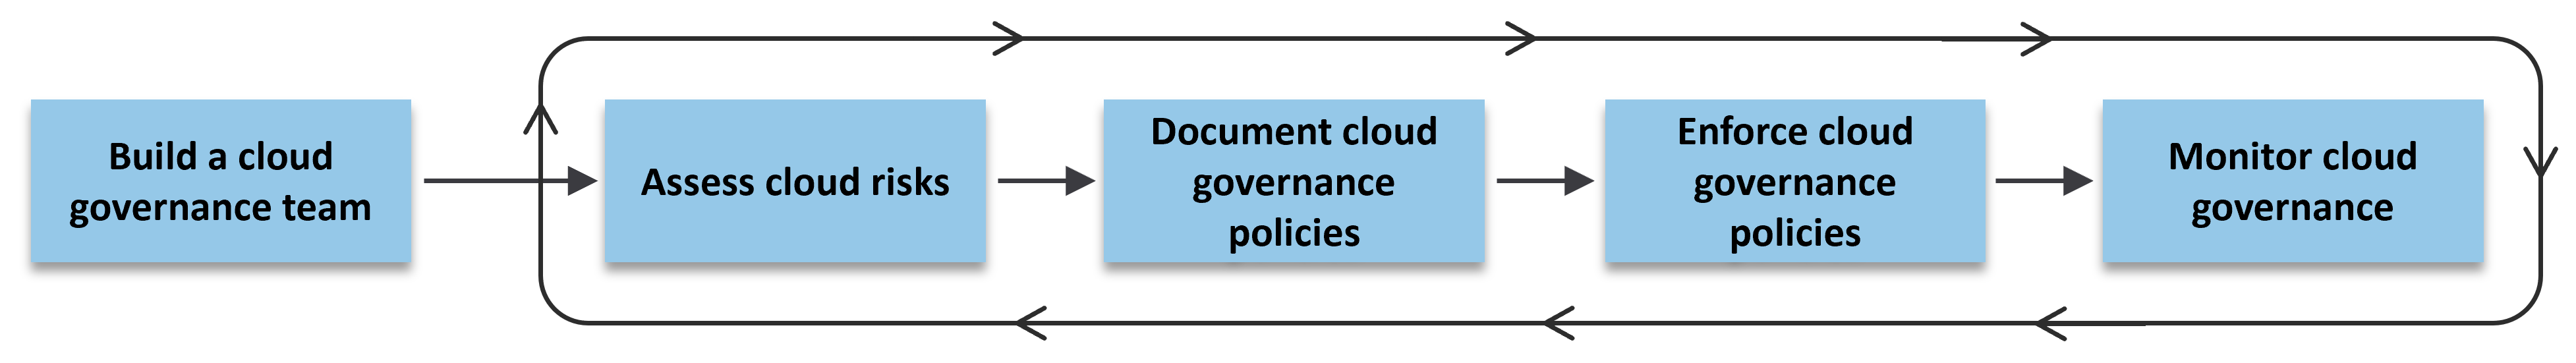 Announcing New Cloud Governance Guidance in the Microsoft Cloud Adoption Framework (CAF) for Azure